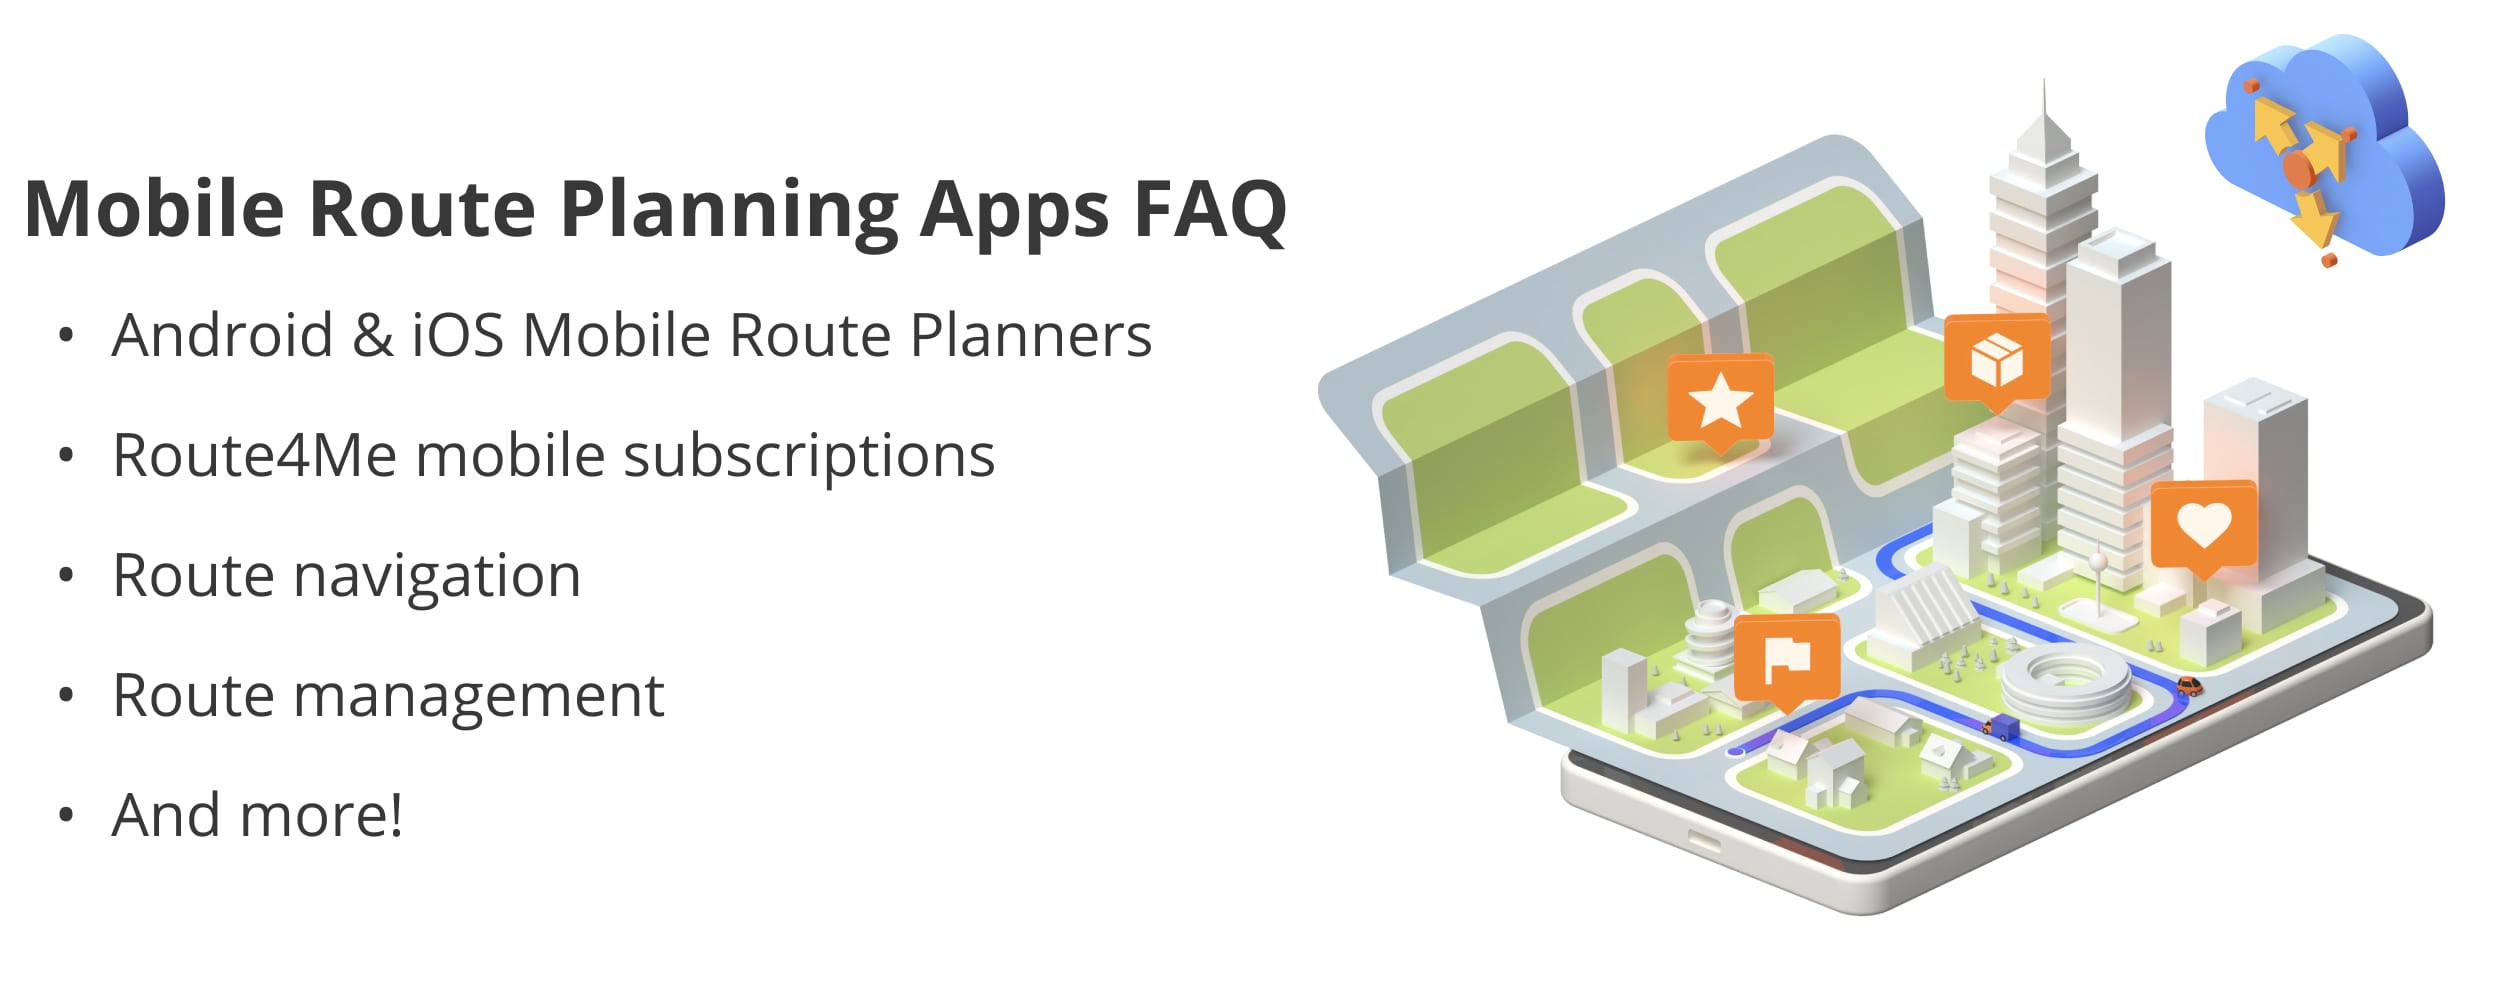 iOS and Android mobile route planner FAQ - subscriptions, navigation, and route planning.